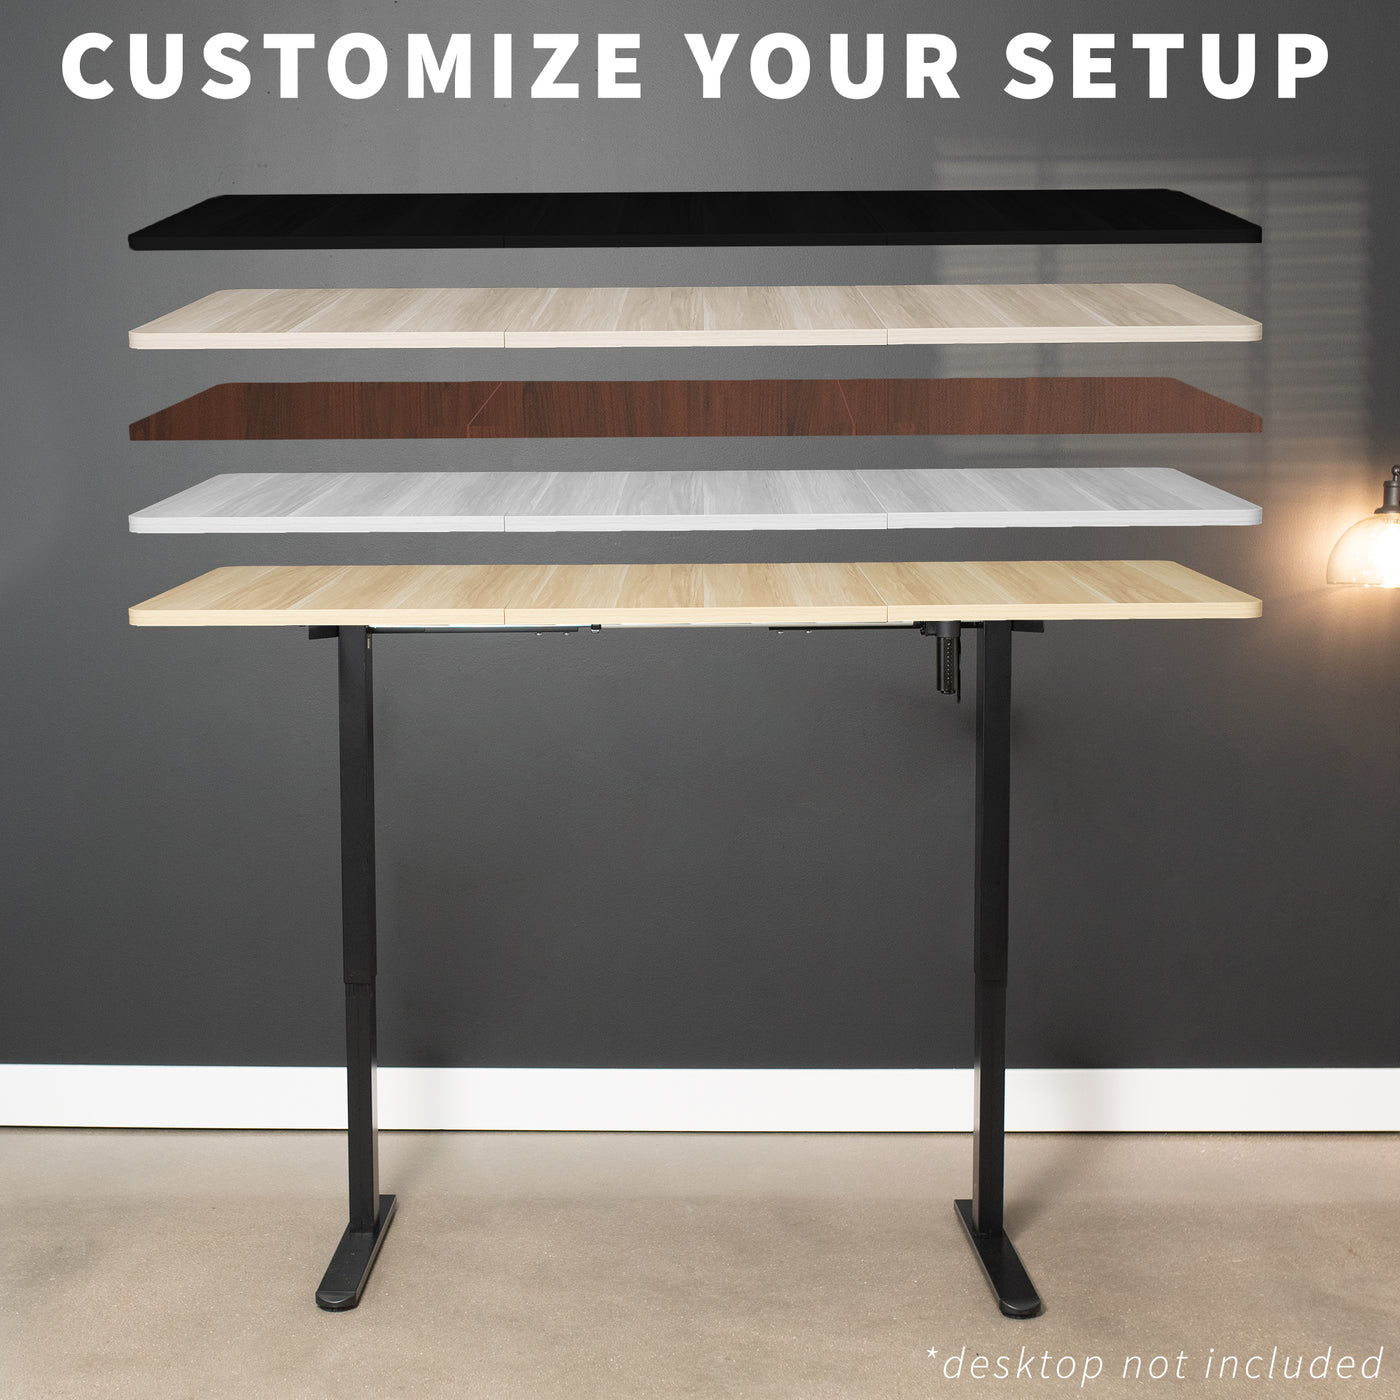 Customize your work set up with any compatible desktop.